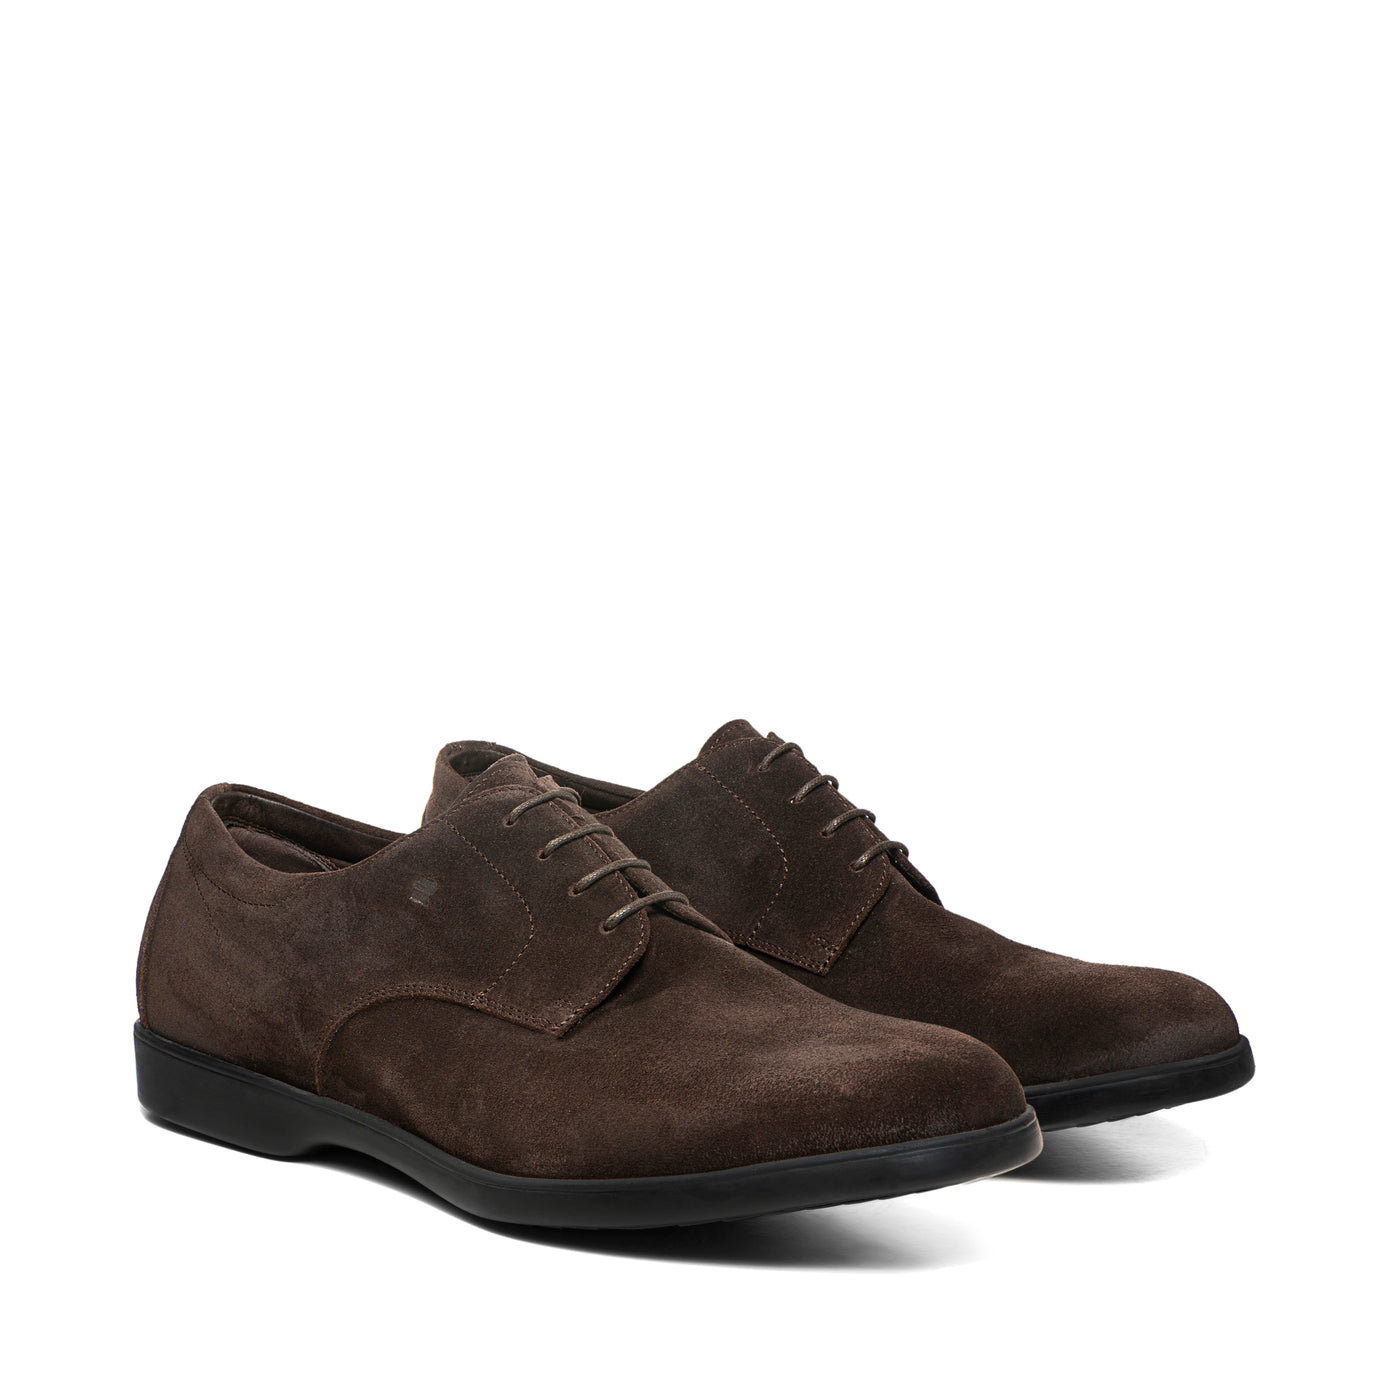 Shop The Latest Collection Of Fratelli Rossetti Man Suede Lace-Up 44610 In Lebanon